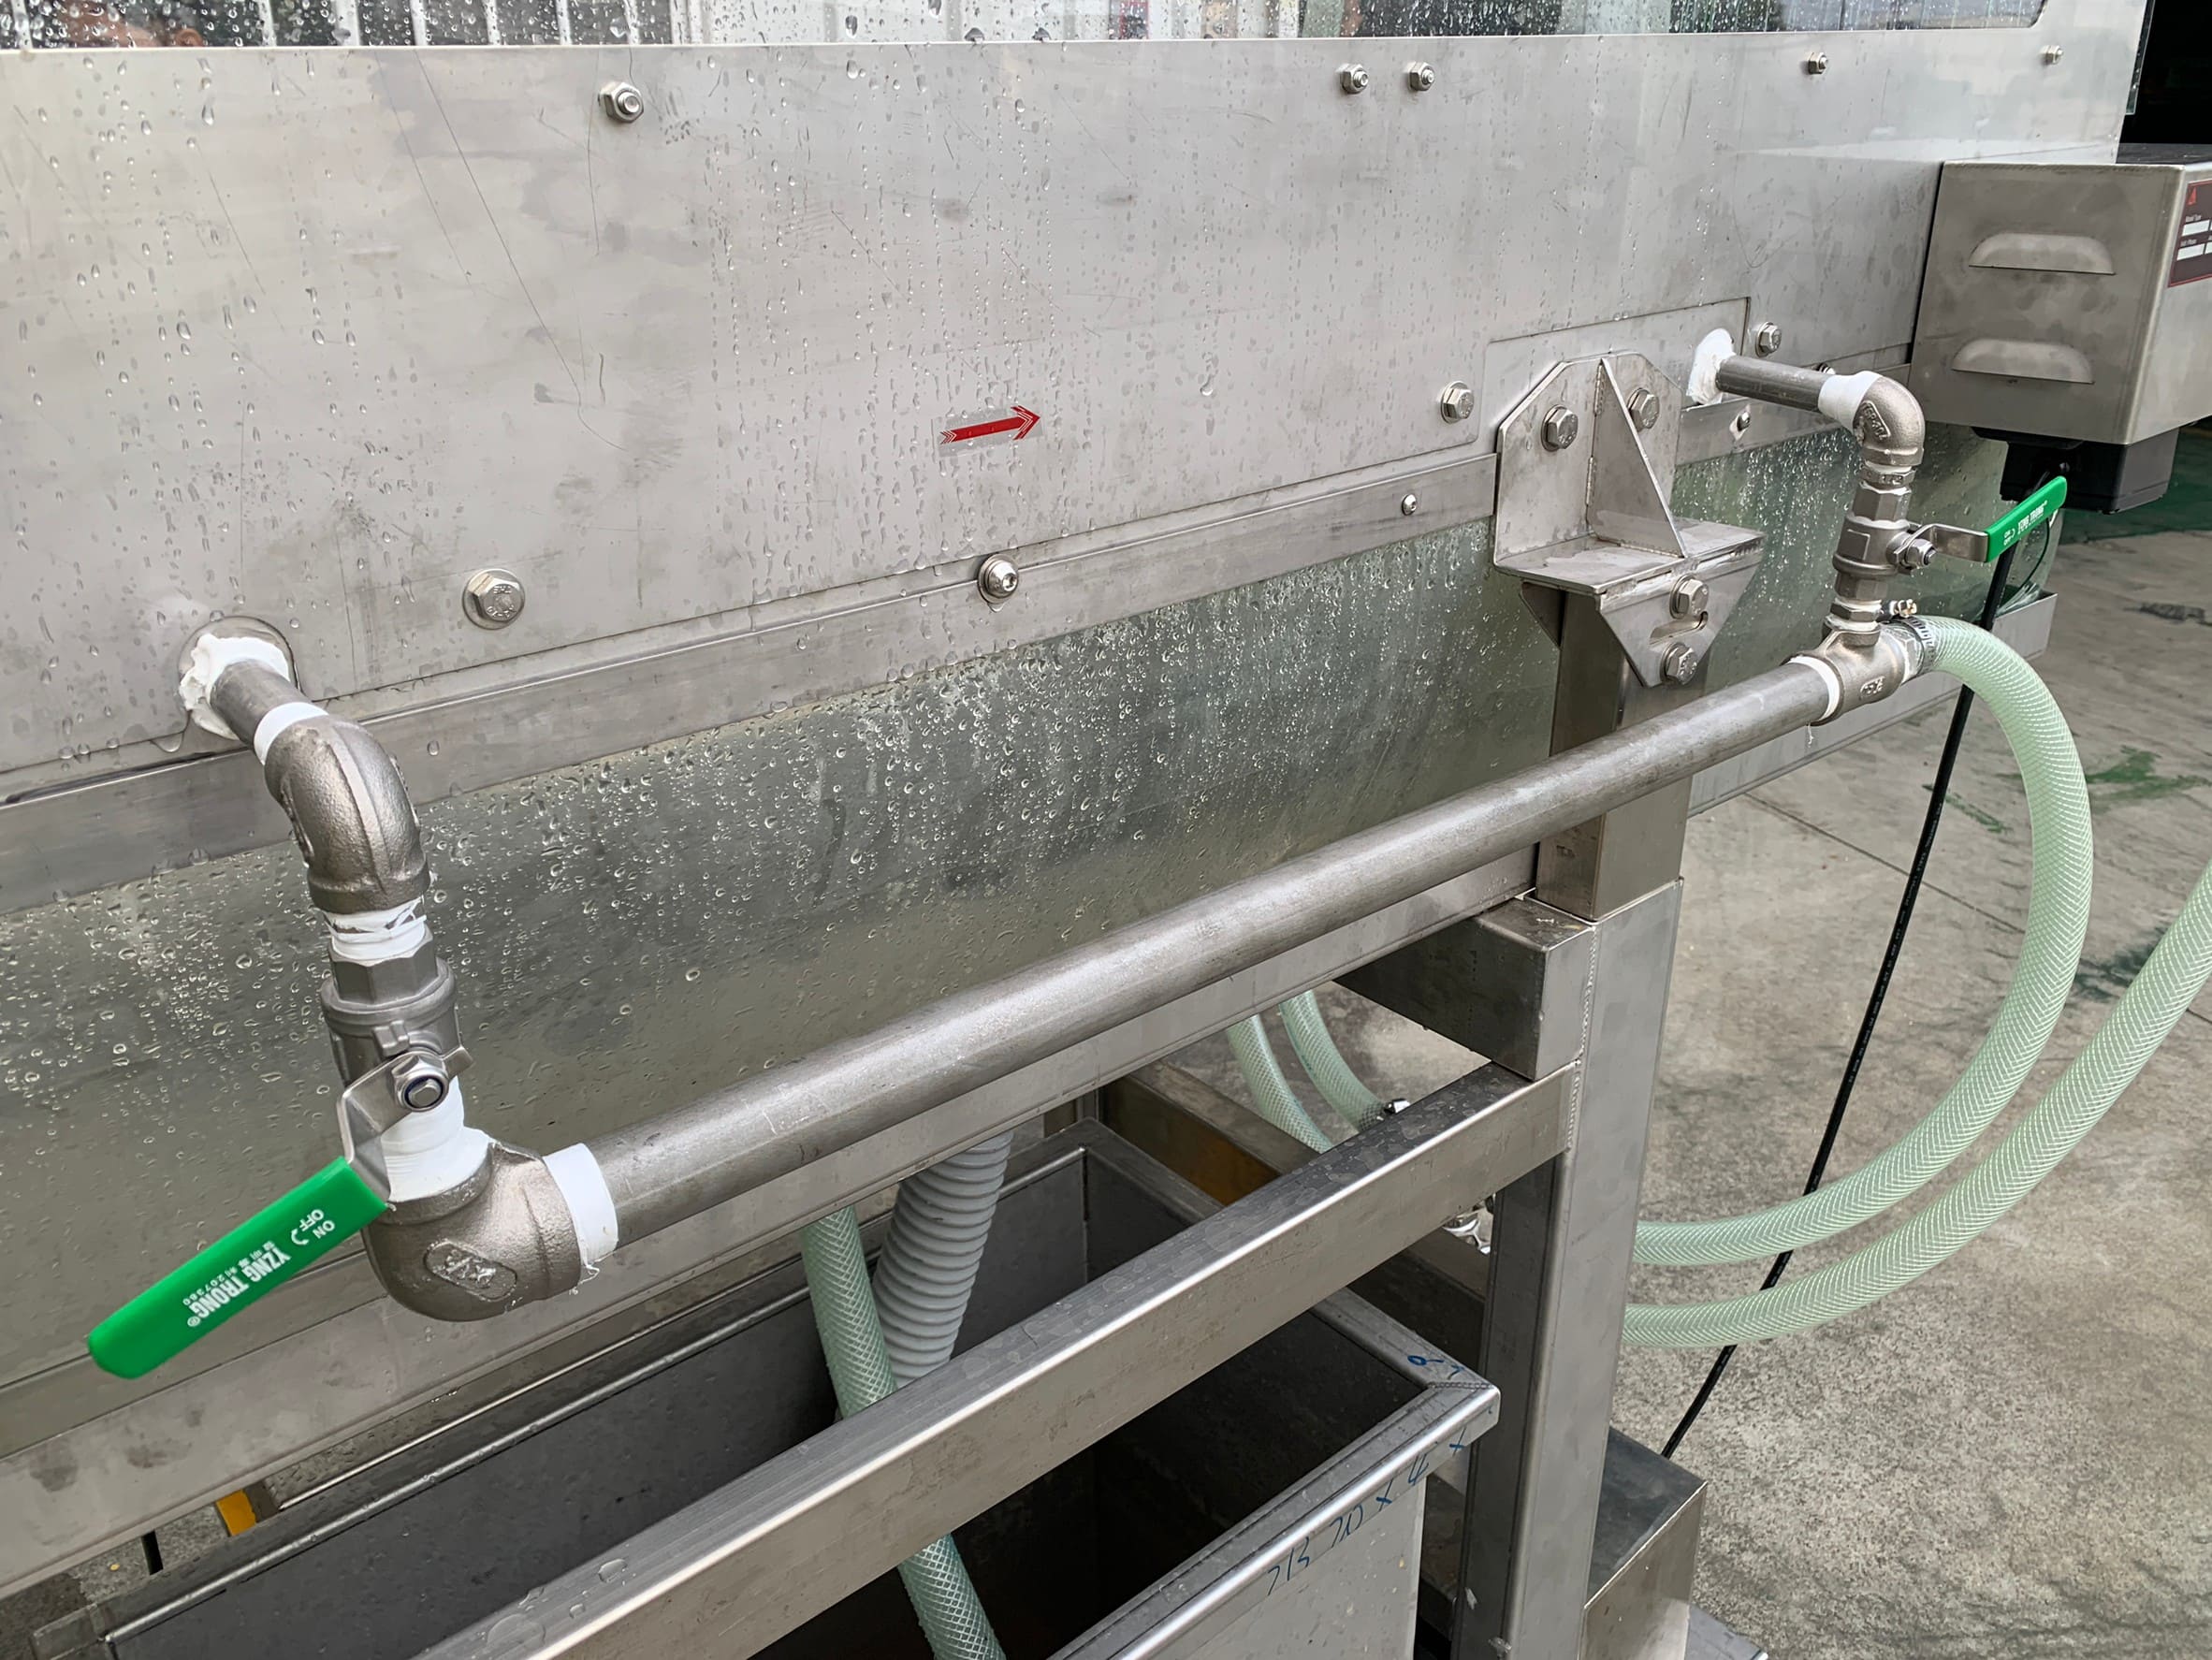 Sprinkler Stainless Steel Conveyor Equipped With Plastic Net-Lichen Conveyor Automatic Equipment Co., Ltd.